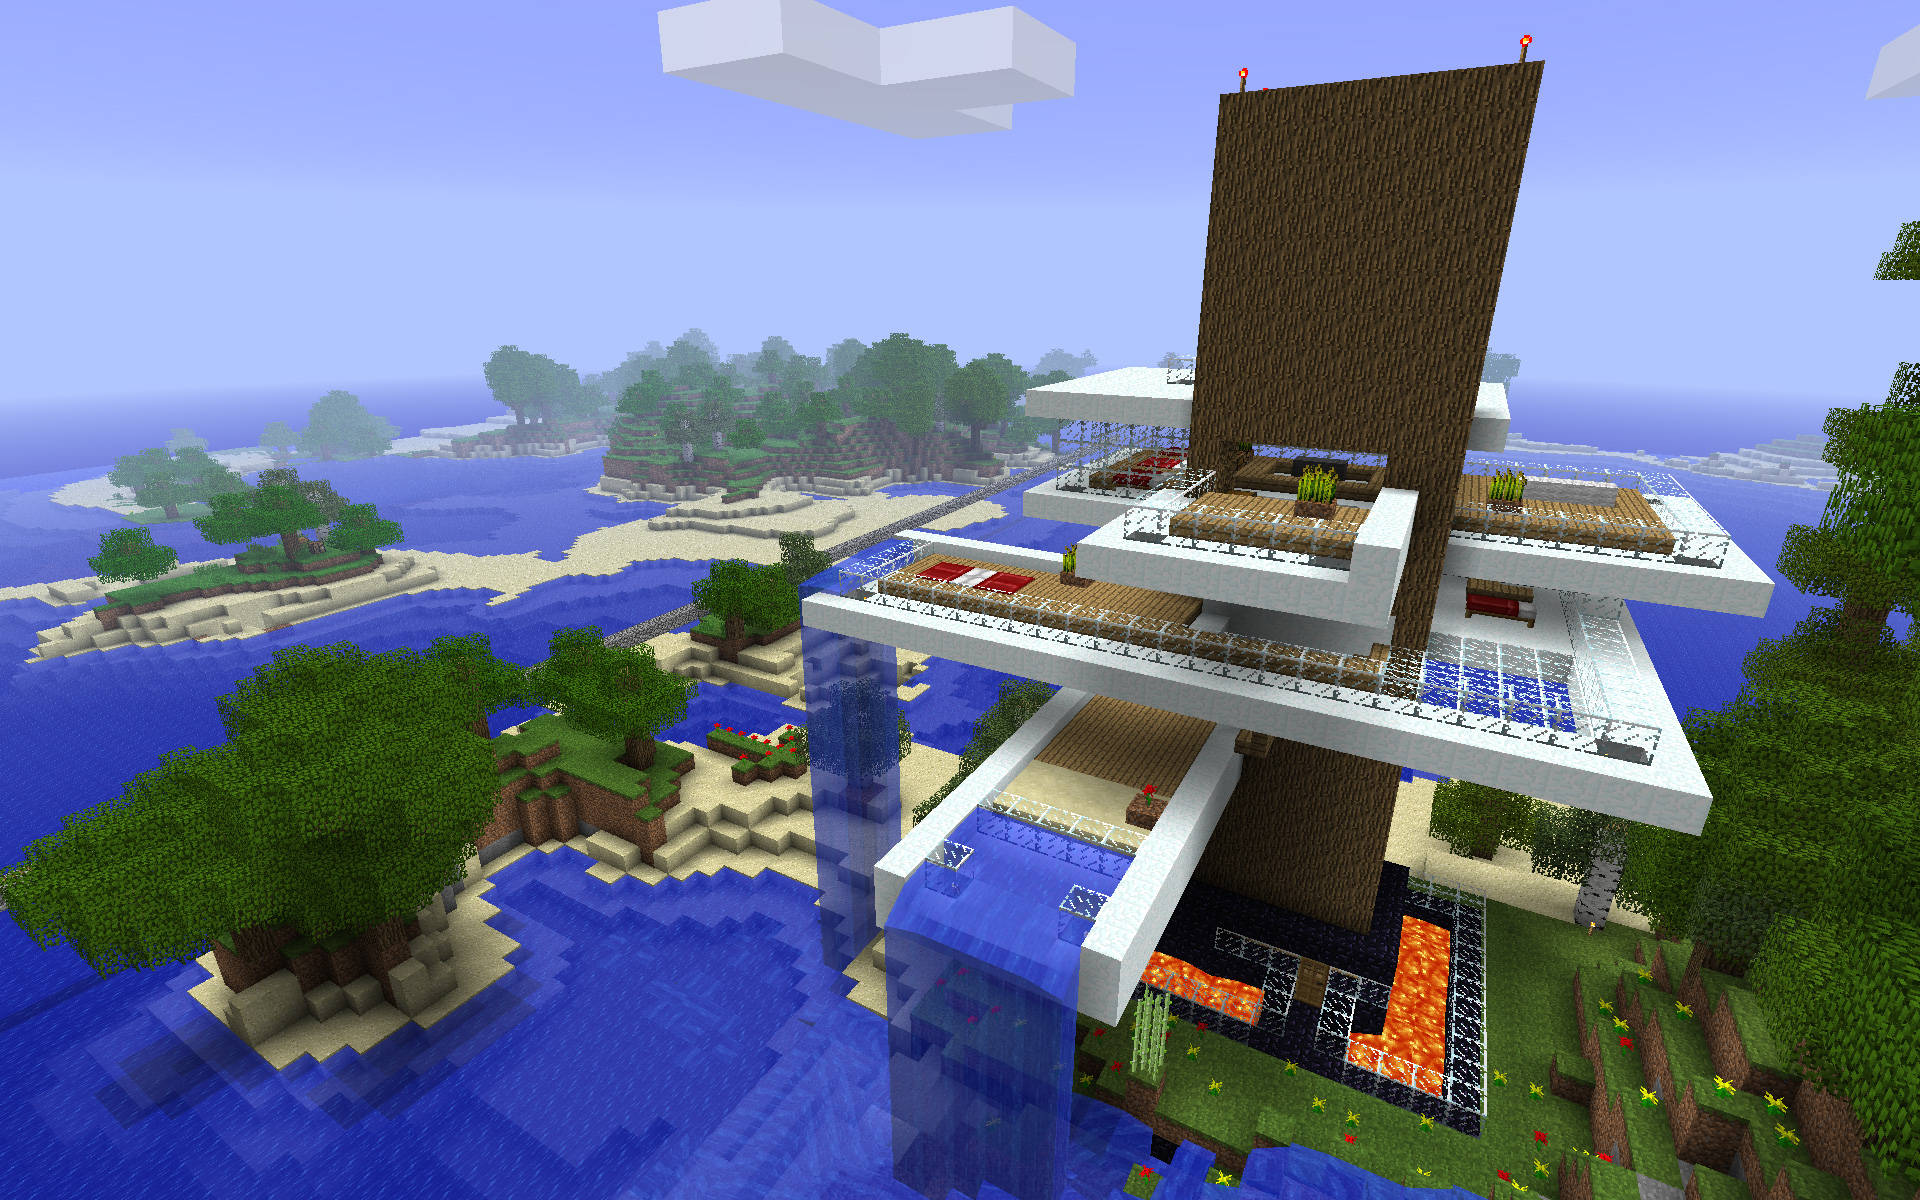 Showcasing The Possibilities Of Minecraft: Modern Mansion